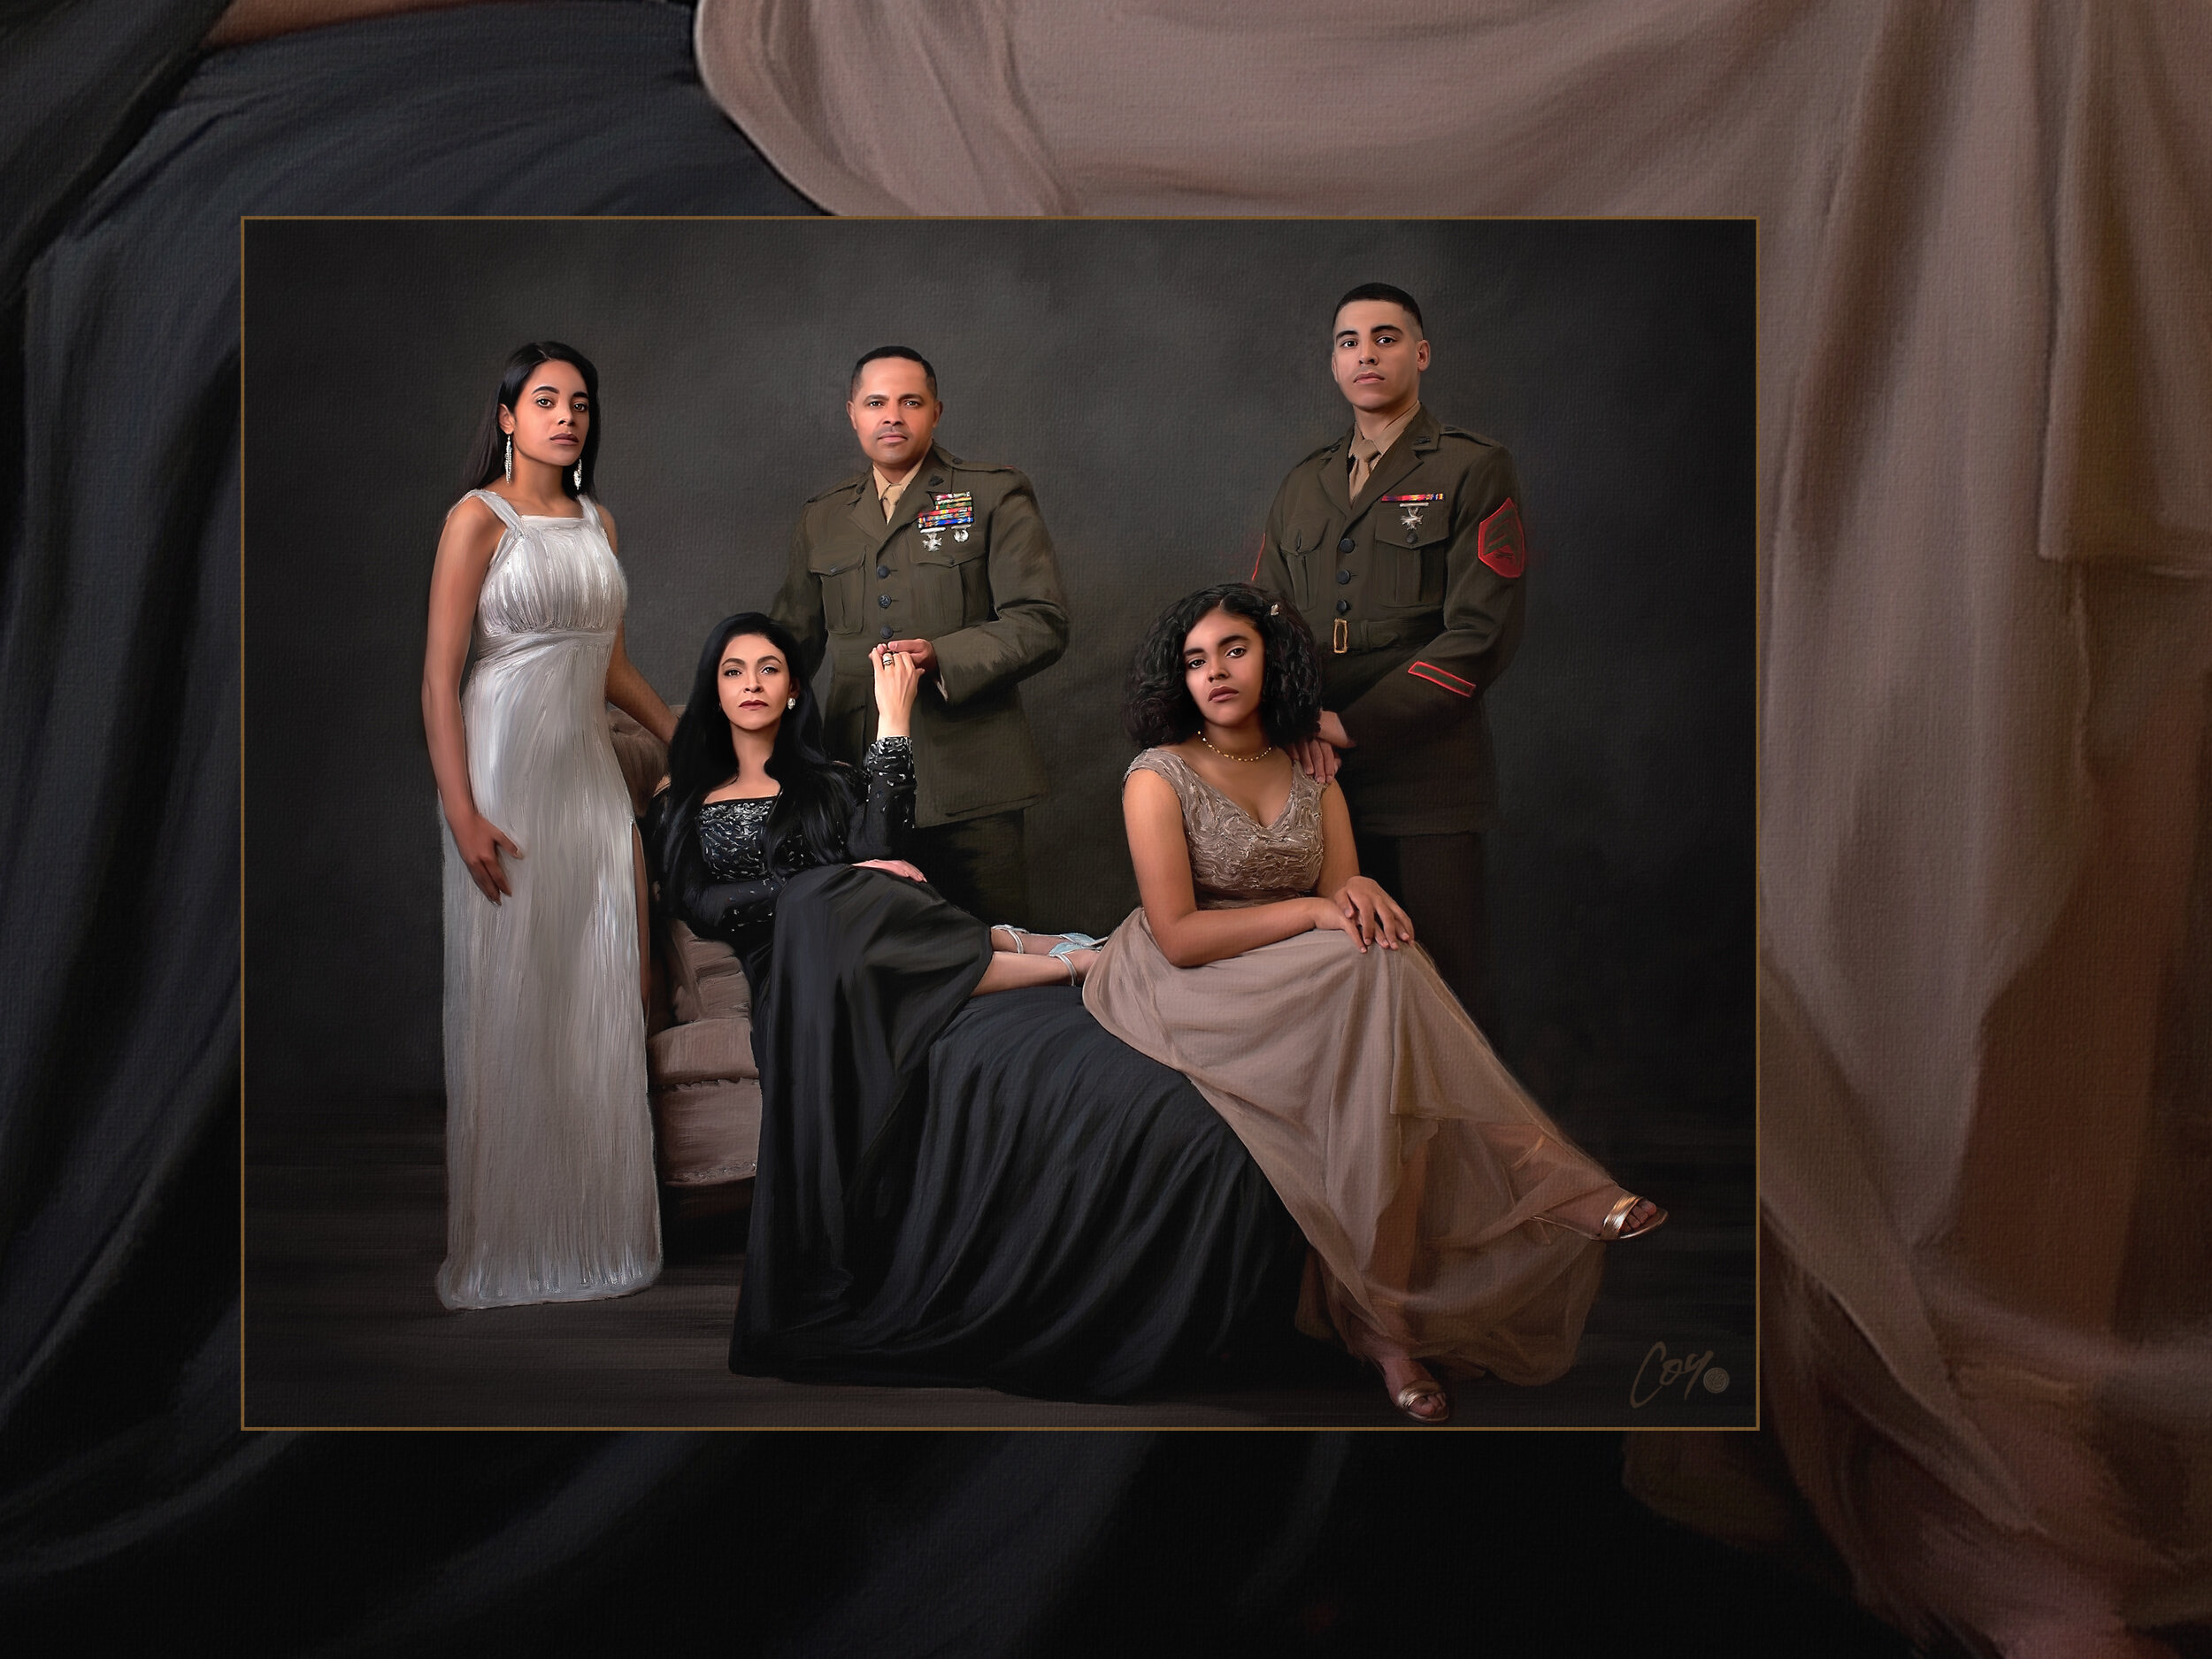 usmc-family-marines-military-navy-photography-painting-oil-san diego-camp pendleton-army-dress blues-alpha-kids-moms-retirement-temecula-orange county-san clemente-photographer-north county.jpg